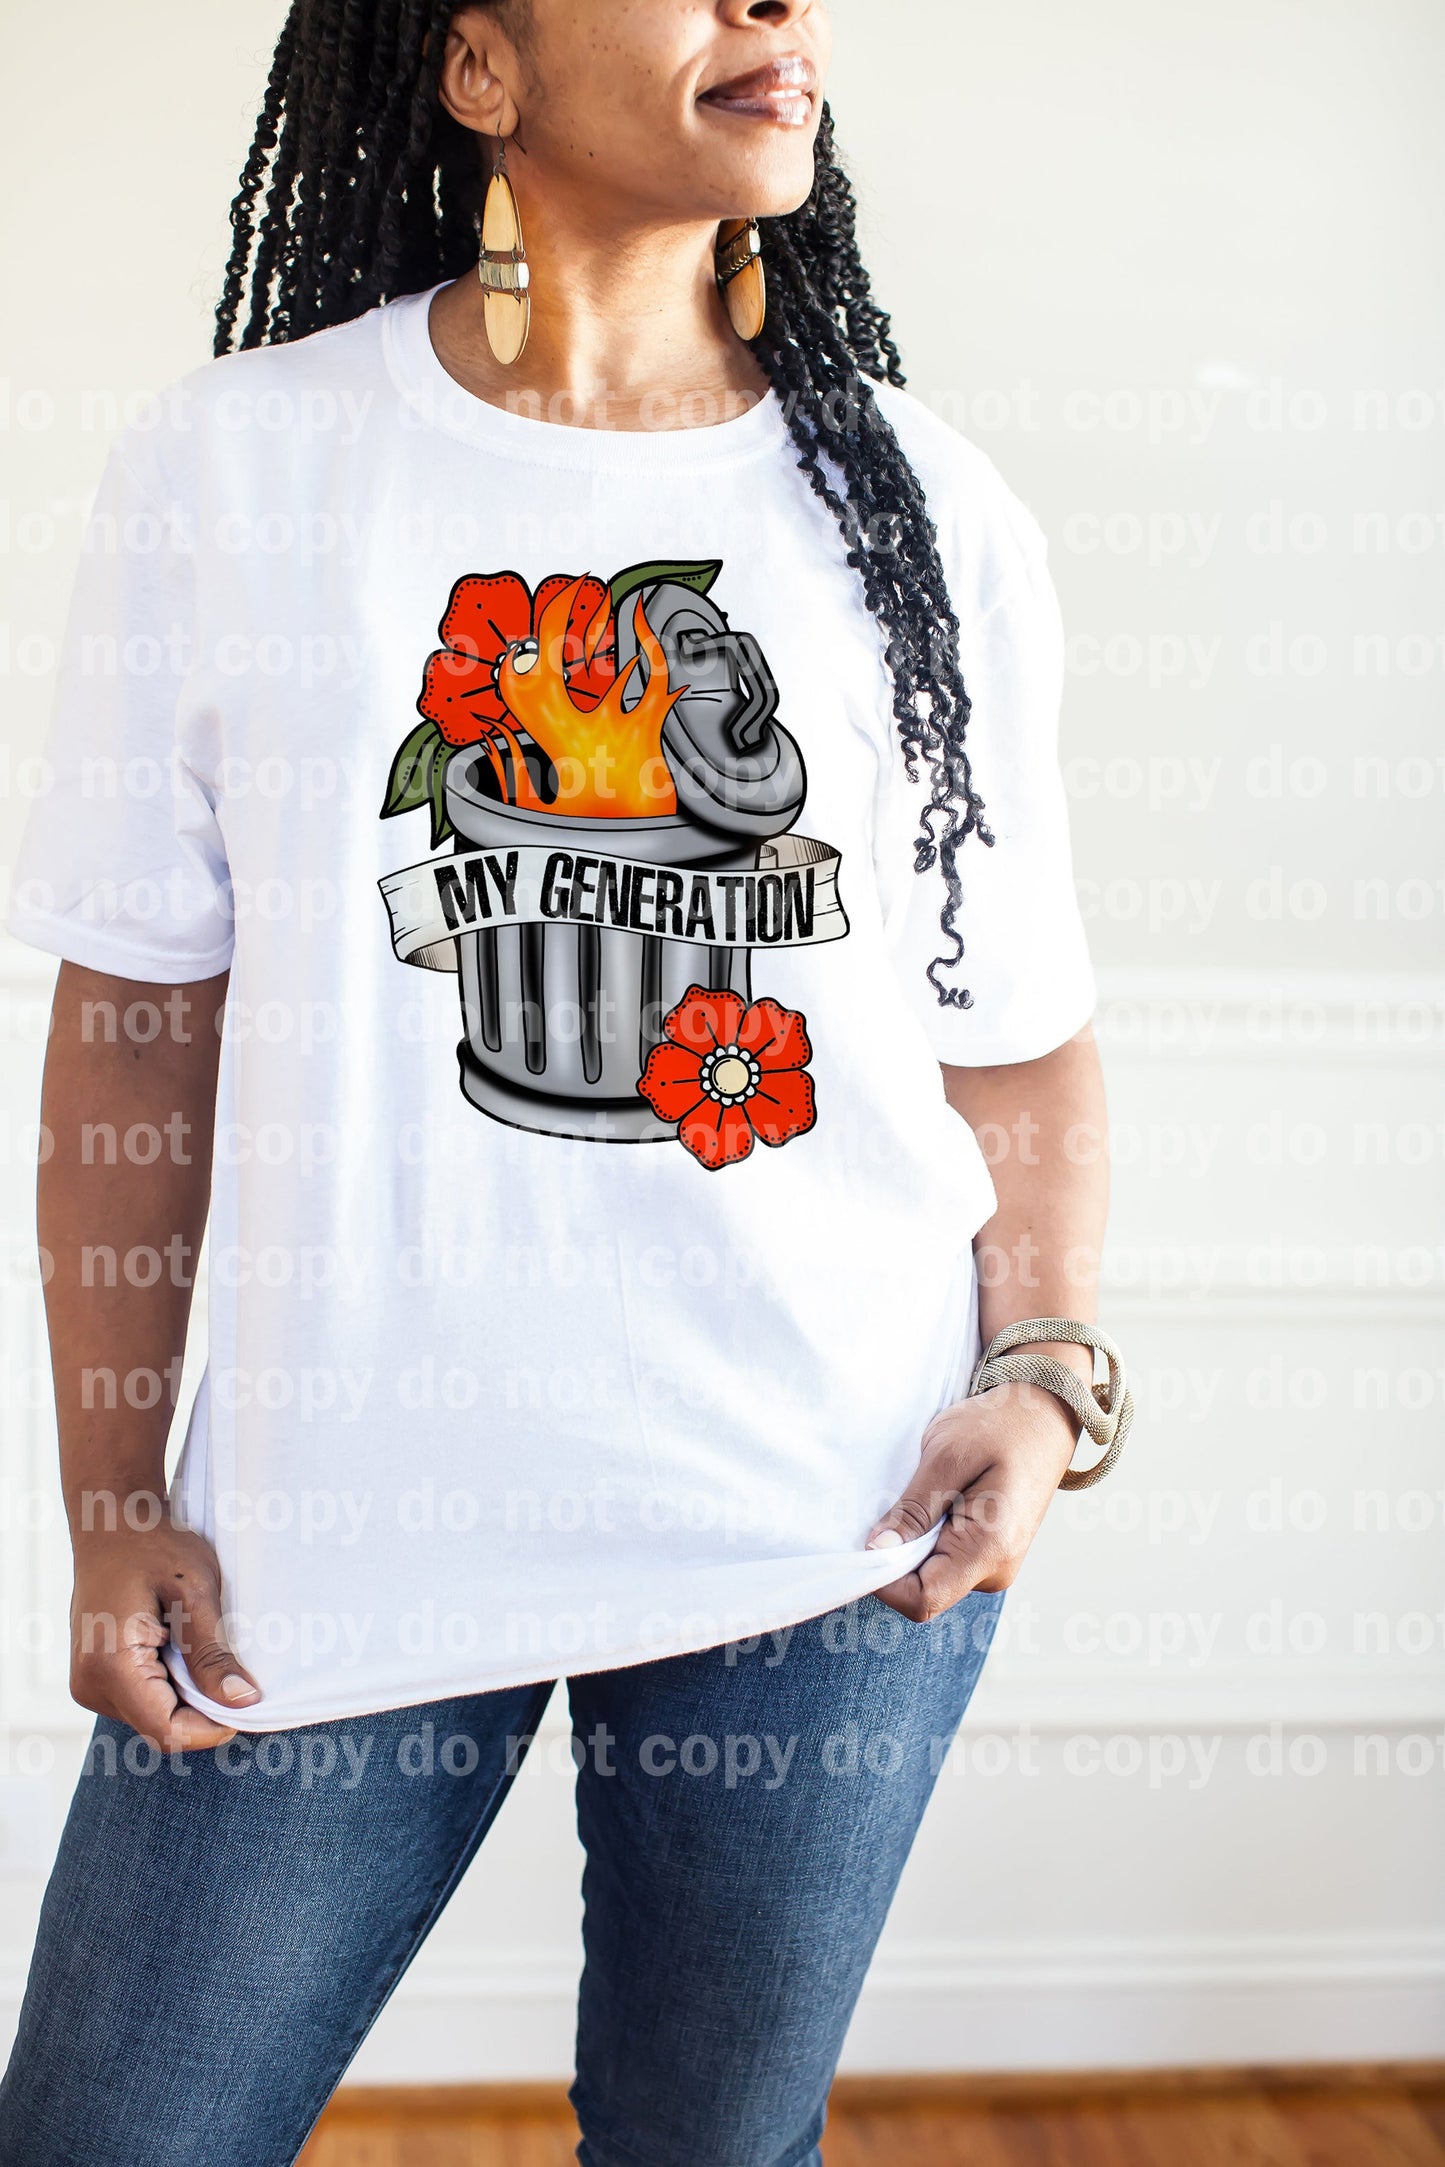 My Generation Dream Print or Sublimation Print